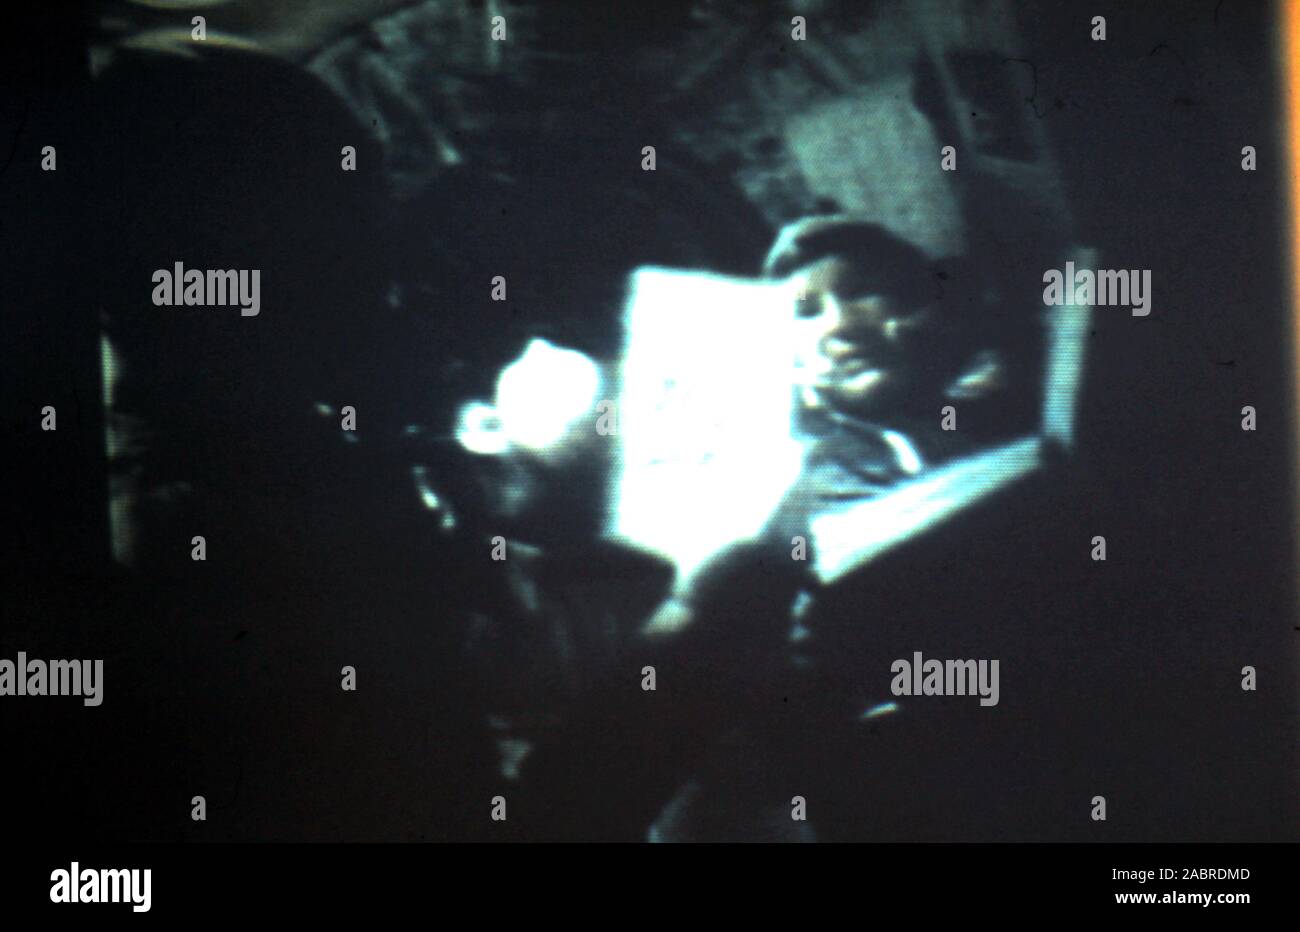 Teleclip Apollo Soyuz Test Project - Alexei Leonov inside Soyuz 19 spacecraft - photo taken directly from color TV screen in the UK - by 'Harry' (the unknown photographer) during the live broadcasts in July 1975.  The Apollo–Soyuz Test Project (ASTP) (Russian: Экспериментальный полёт «Аполлон» – «Союз» (ЭПАС), Eksperimentalniy polyot Apollon-Soyuz, lit. 'Experimental flight Apollo-Soyuz', commonly referred to by the Soviets as Soyuz–Apollo), conducted in July 1975. Stock Photo